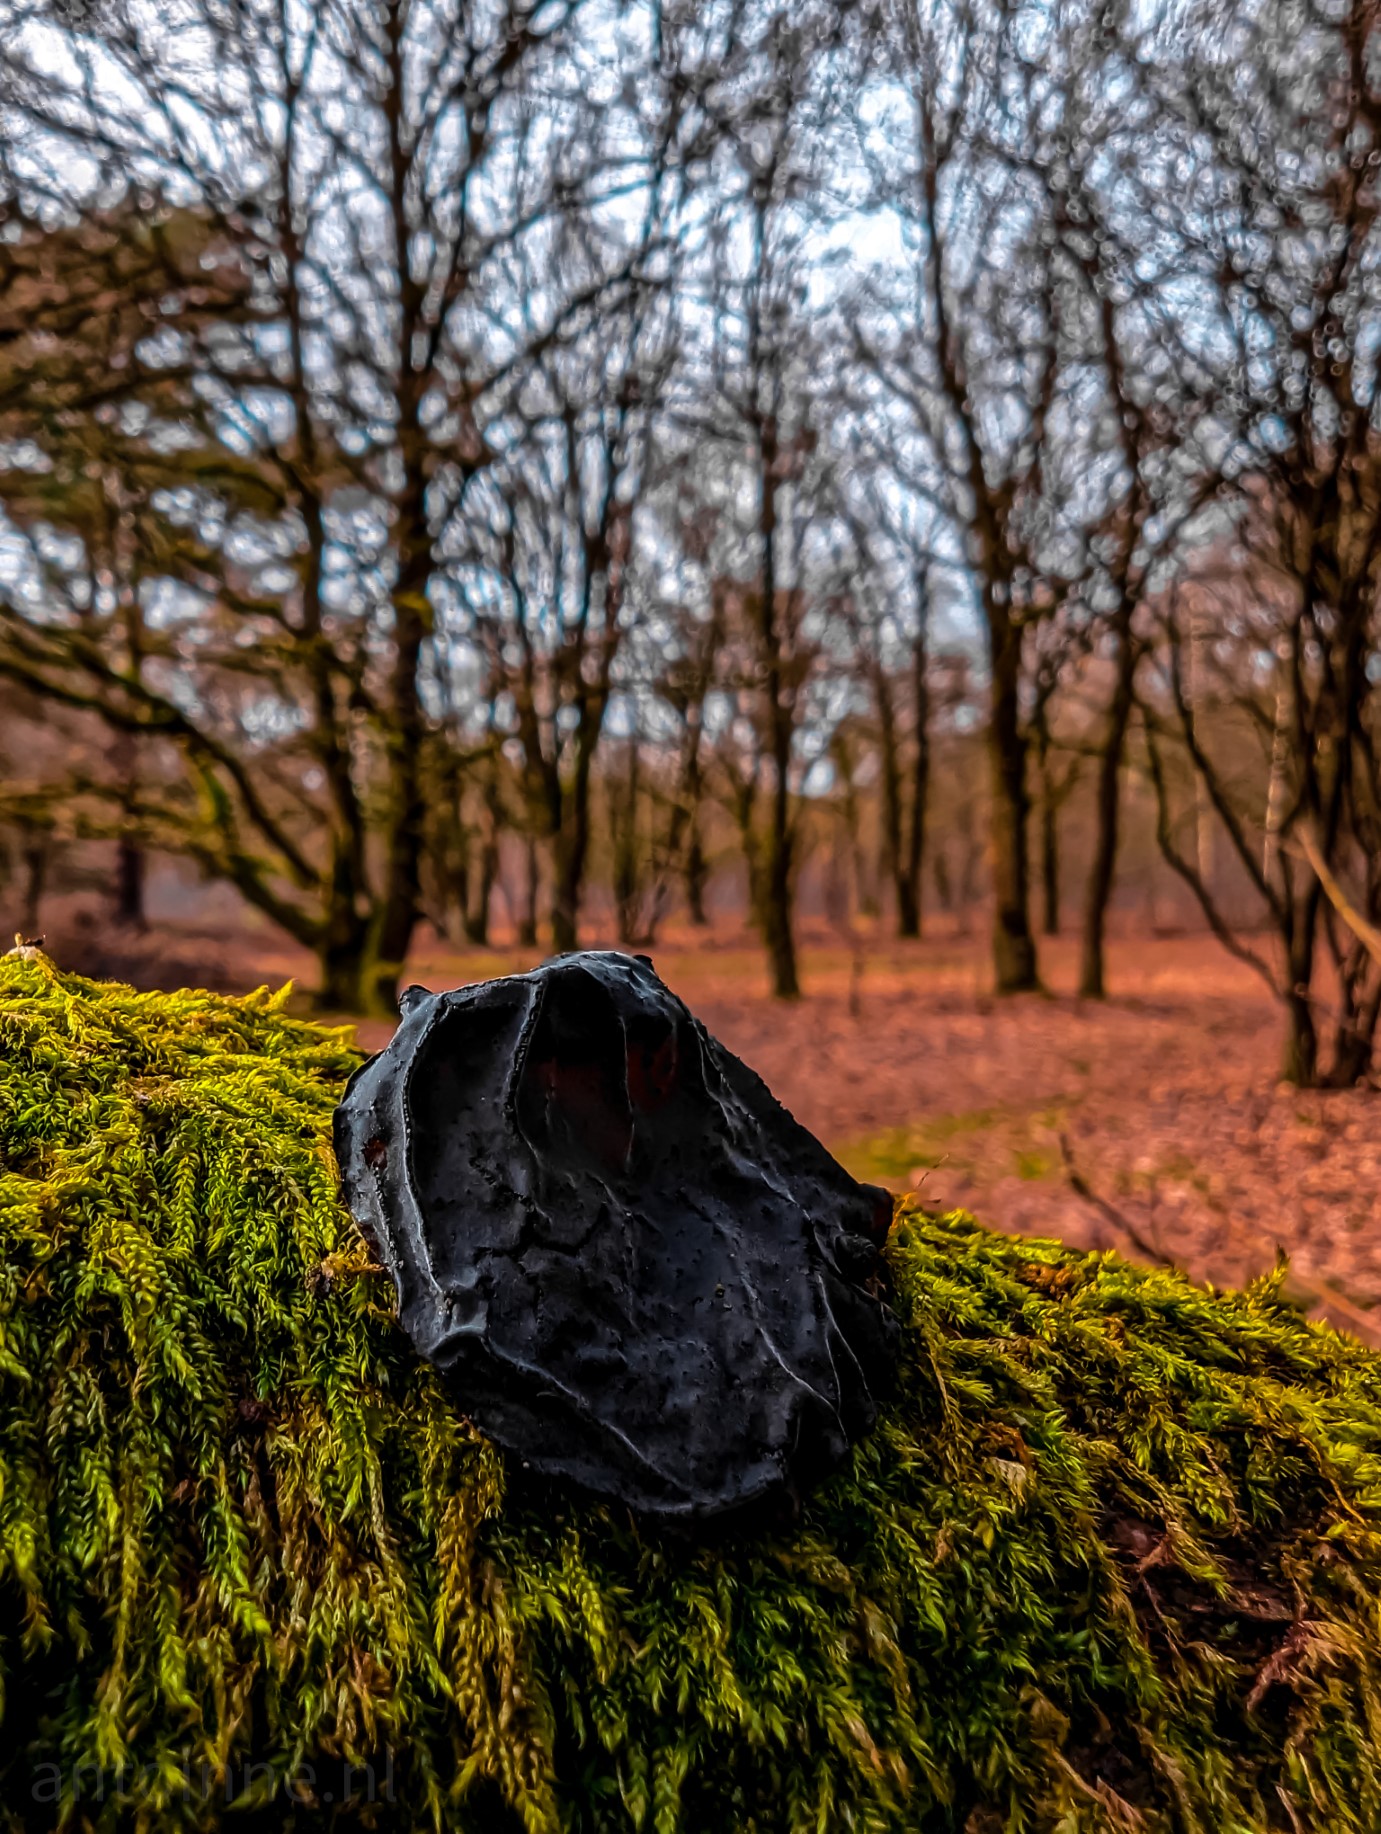 An image of "Exidia glandulosa", a black jelly fungus of the family Auriculariaceae. It is growing on a branch of an oak tree covered with green lichen. In the background there are more oaks and some light blue sky.